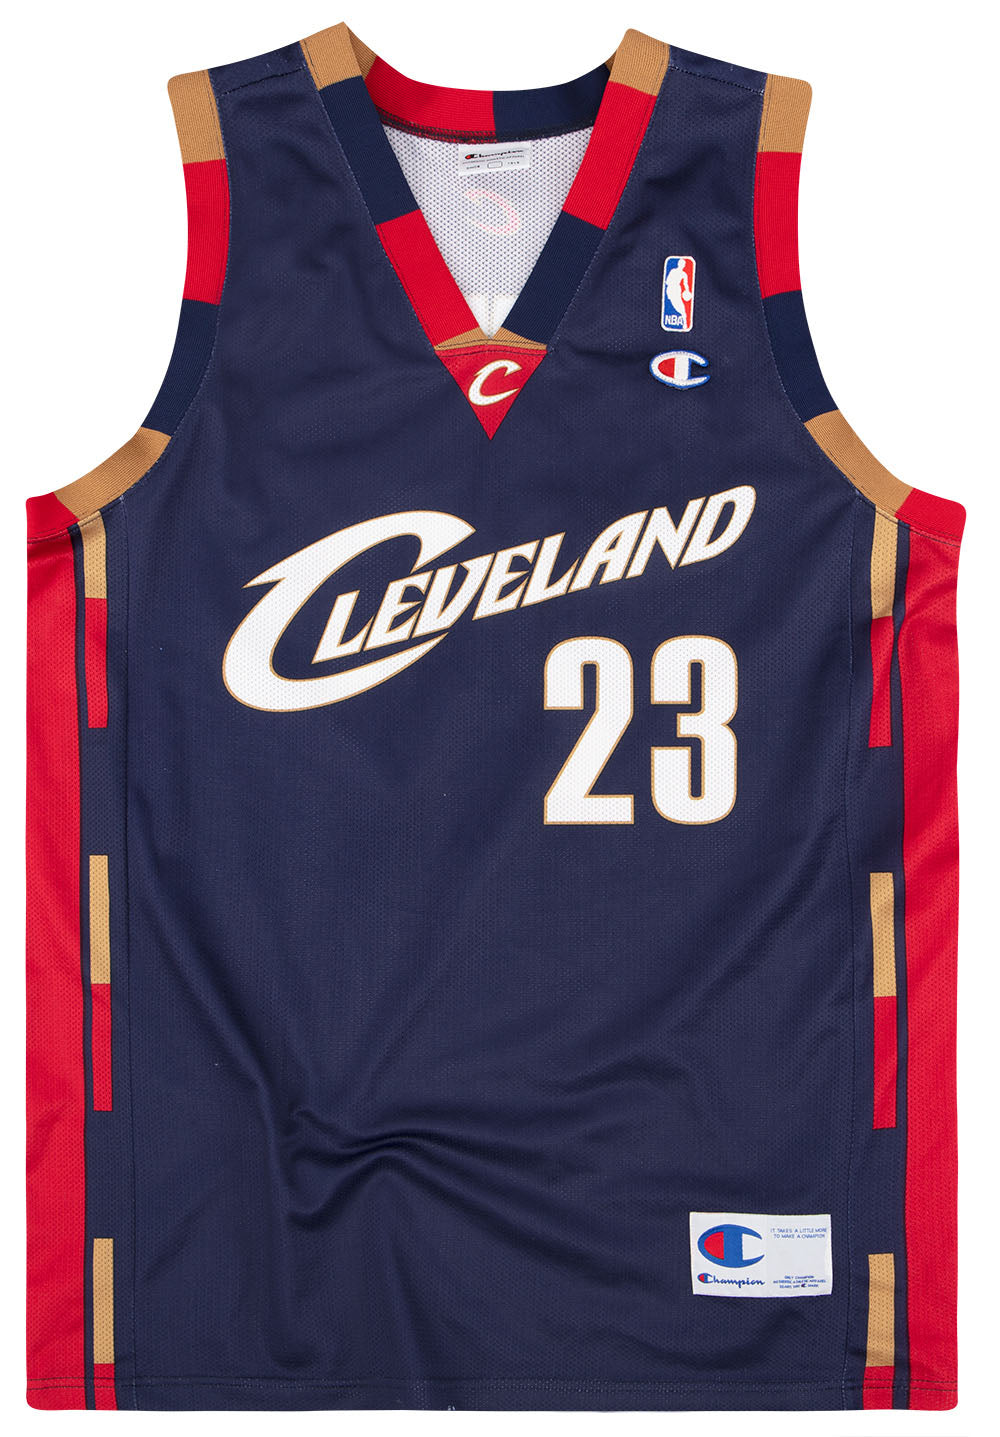 1999-02 CLEVELAND CAVALIERS MILLER #24 CHAMPION JERSEY (AWAY) M - Classic  American Sports